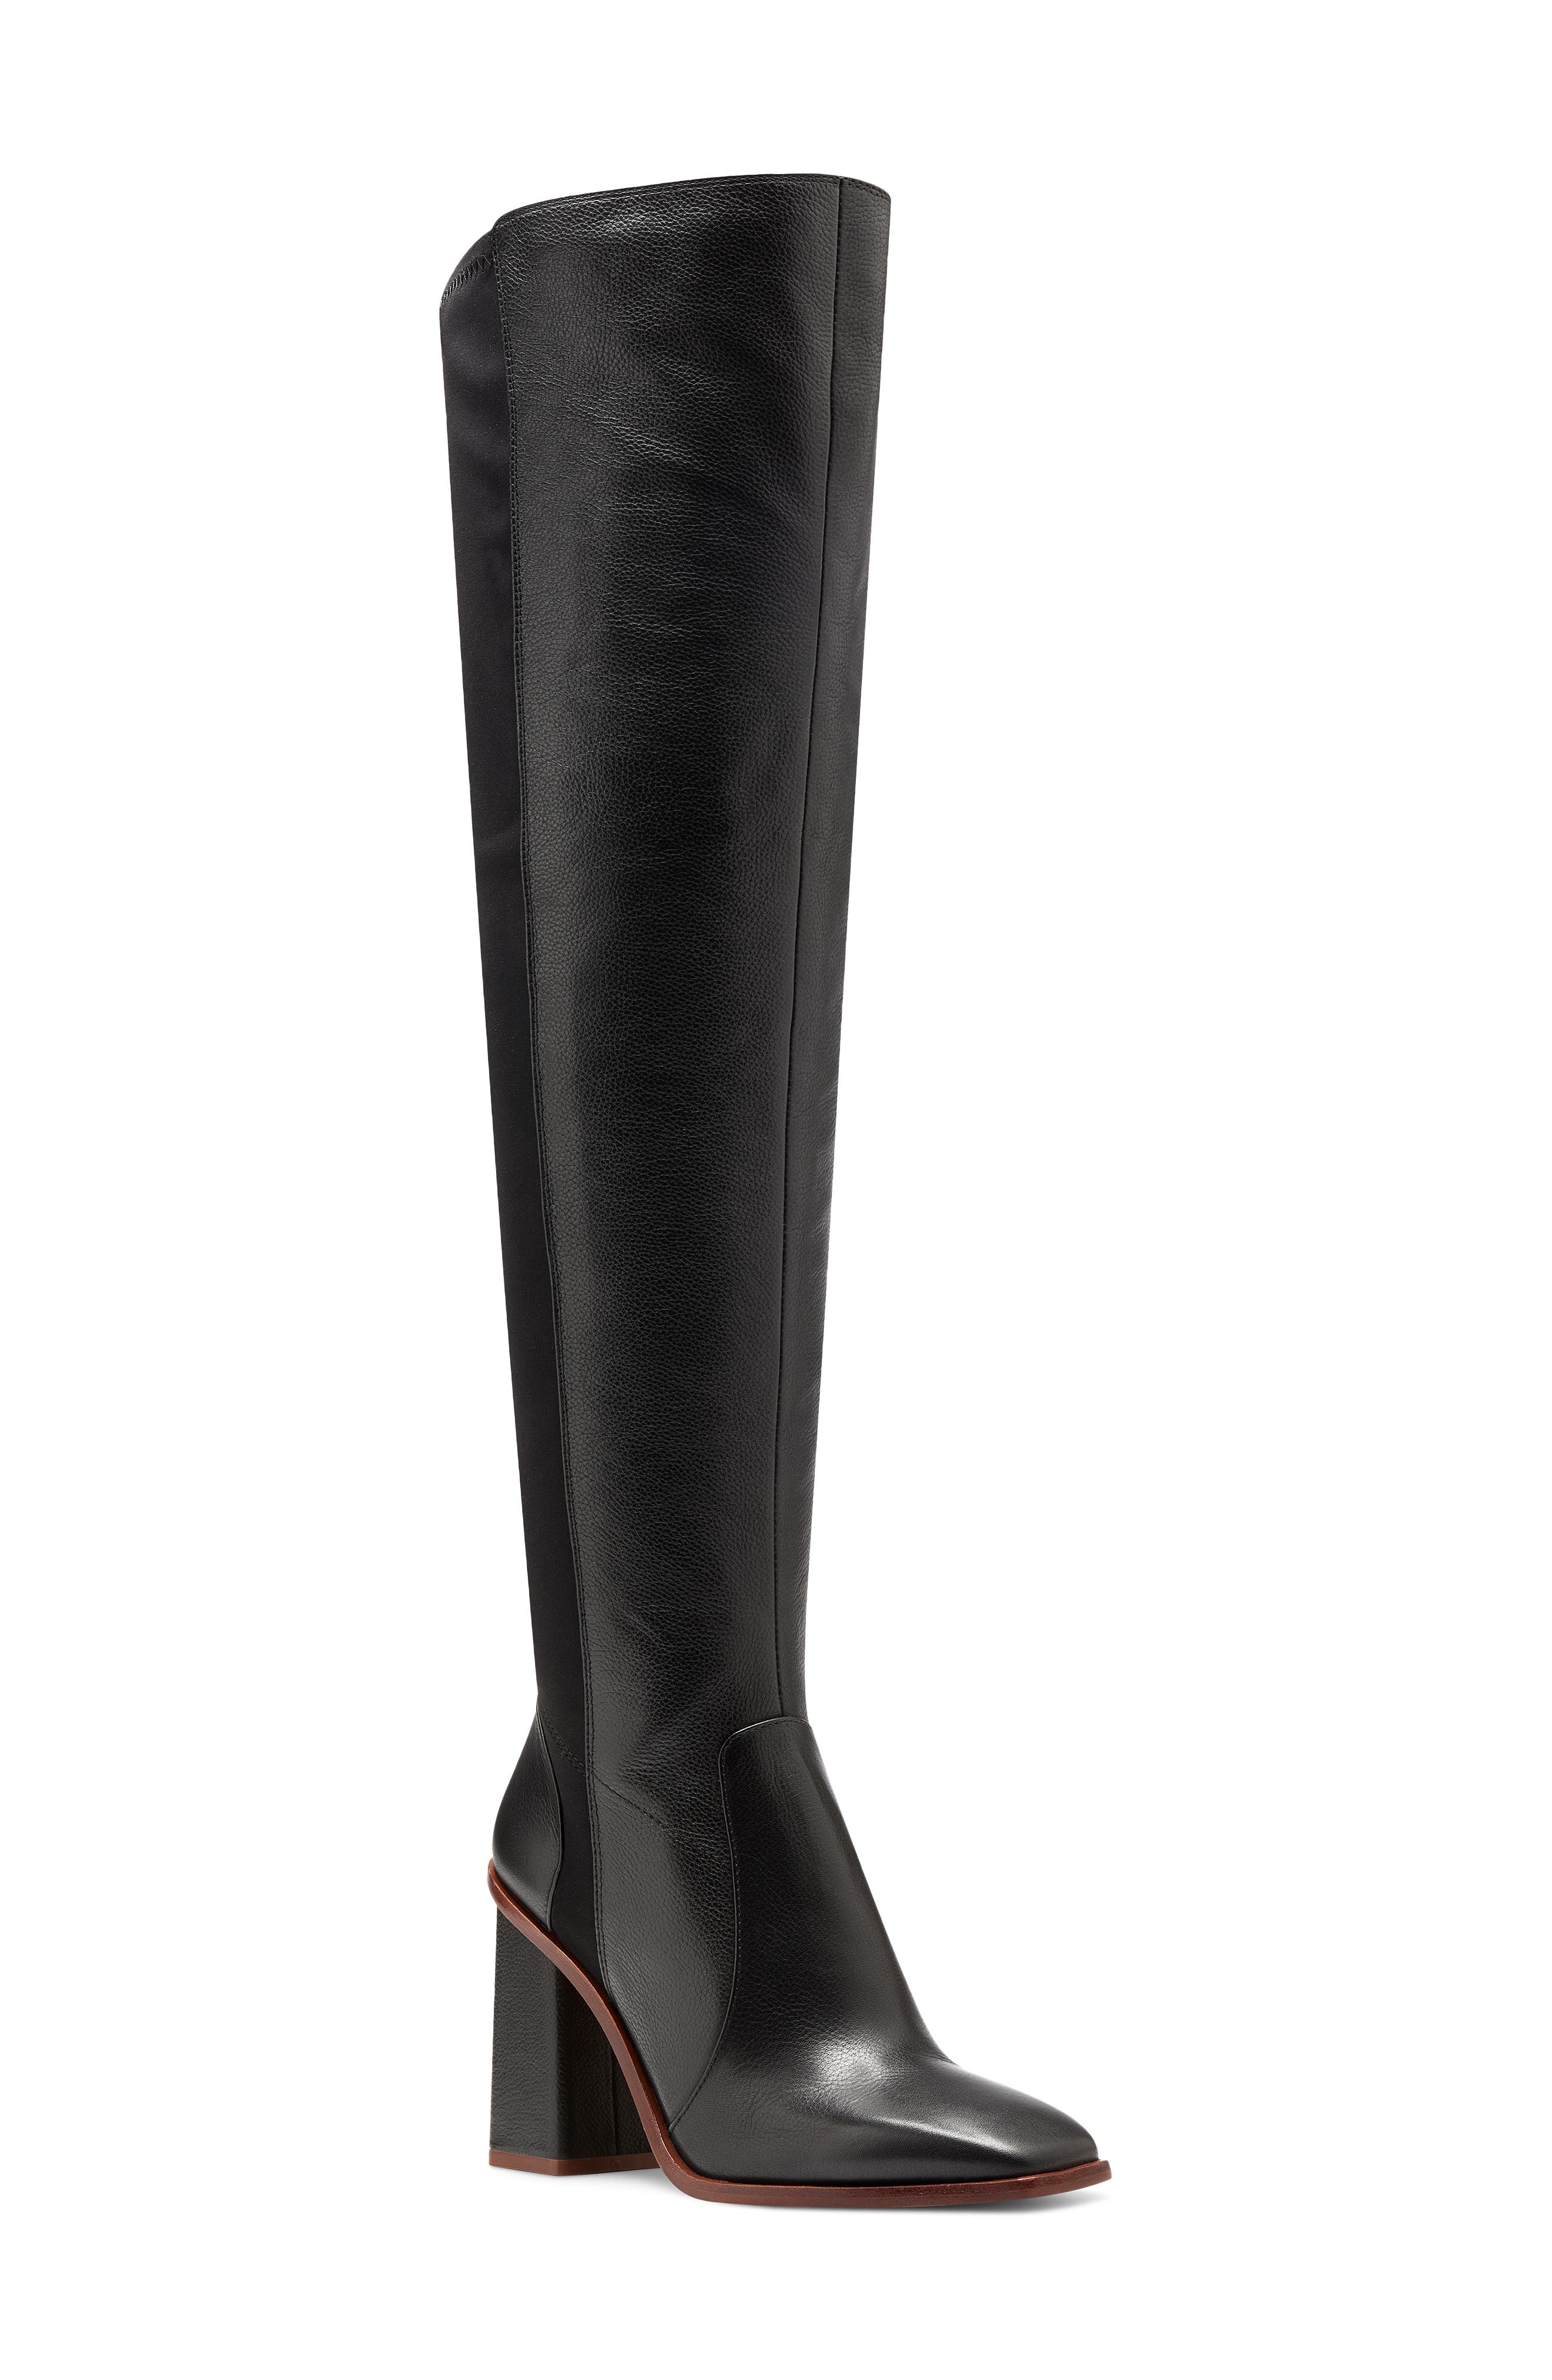 black over the knee boots nordstrom